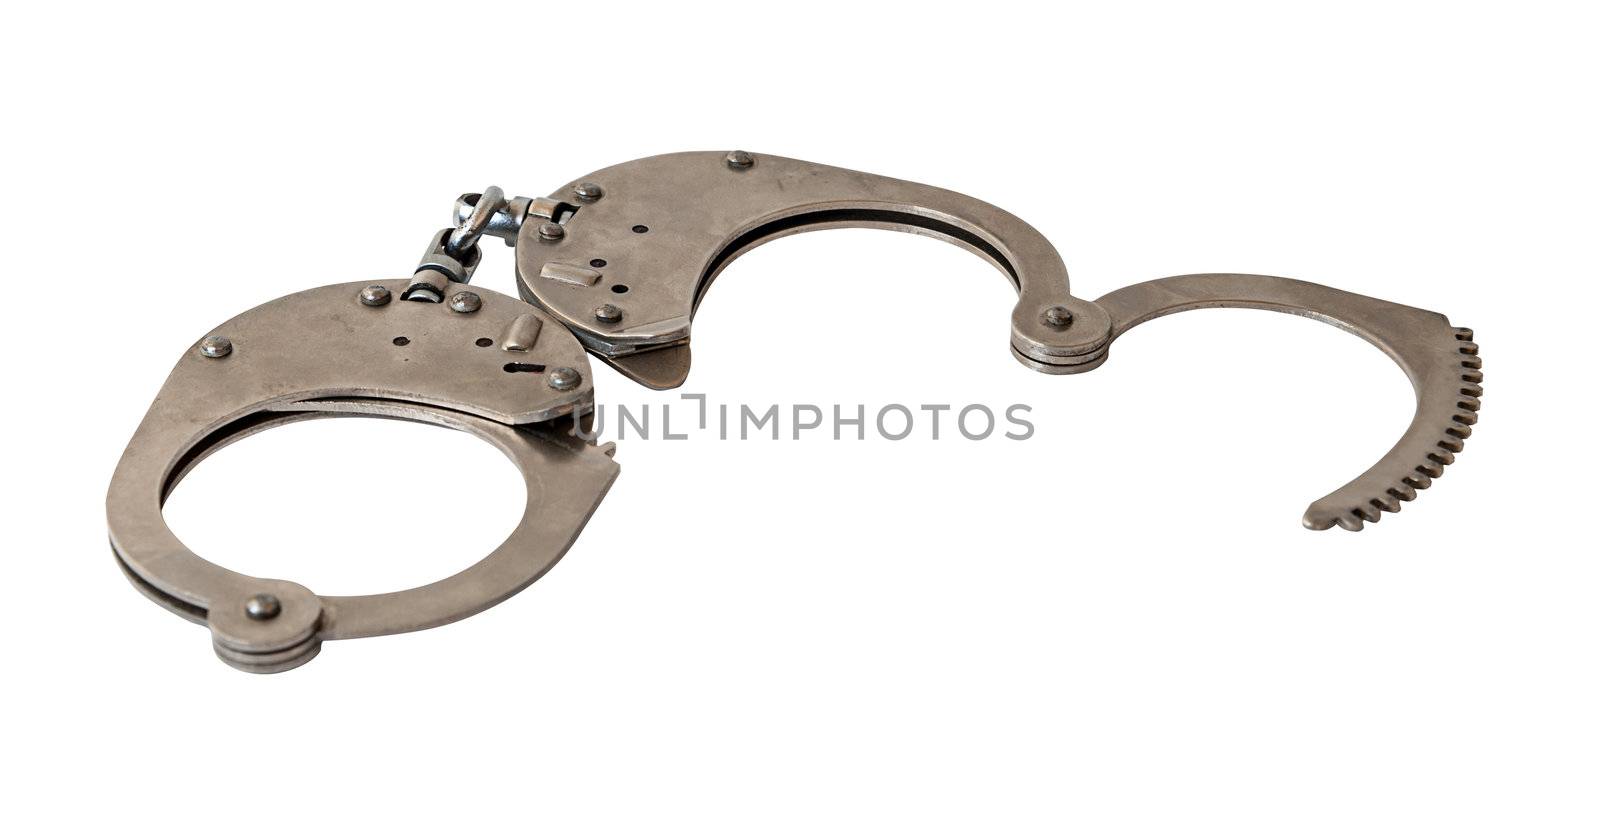 Steel metallic handcuffs isolated on white background